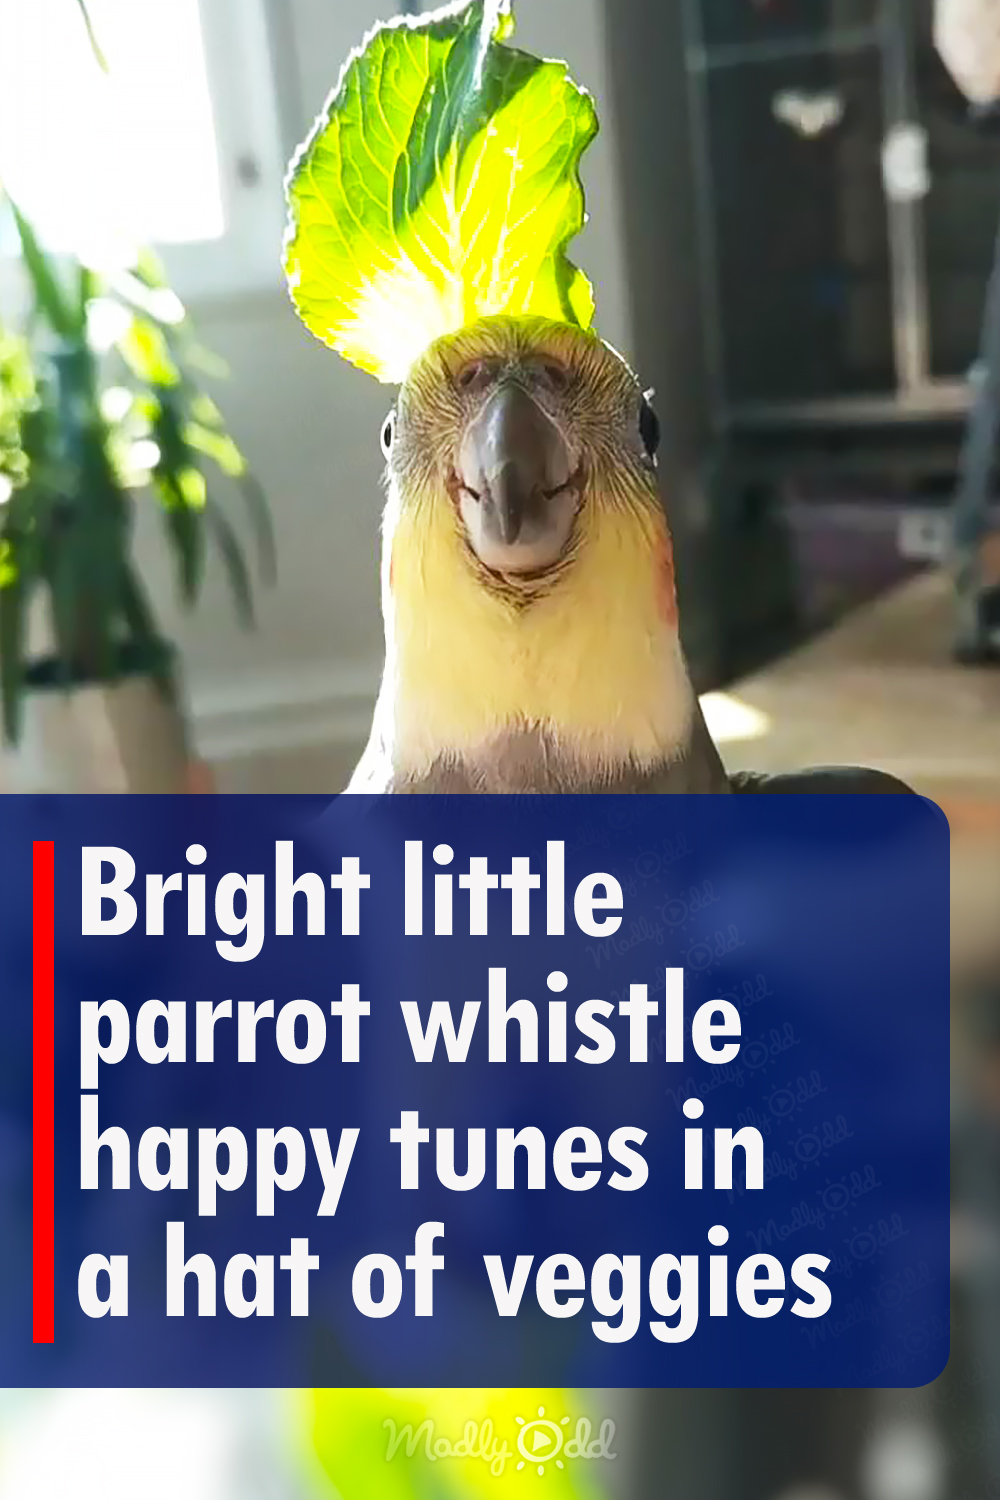 Bright little parrot whistle happy tunes in a hat of veggies